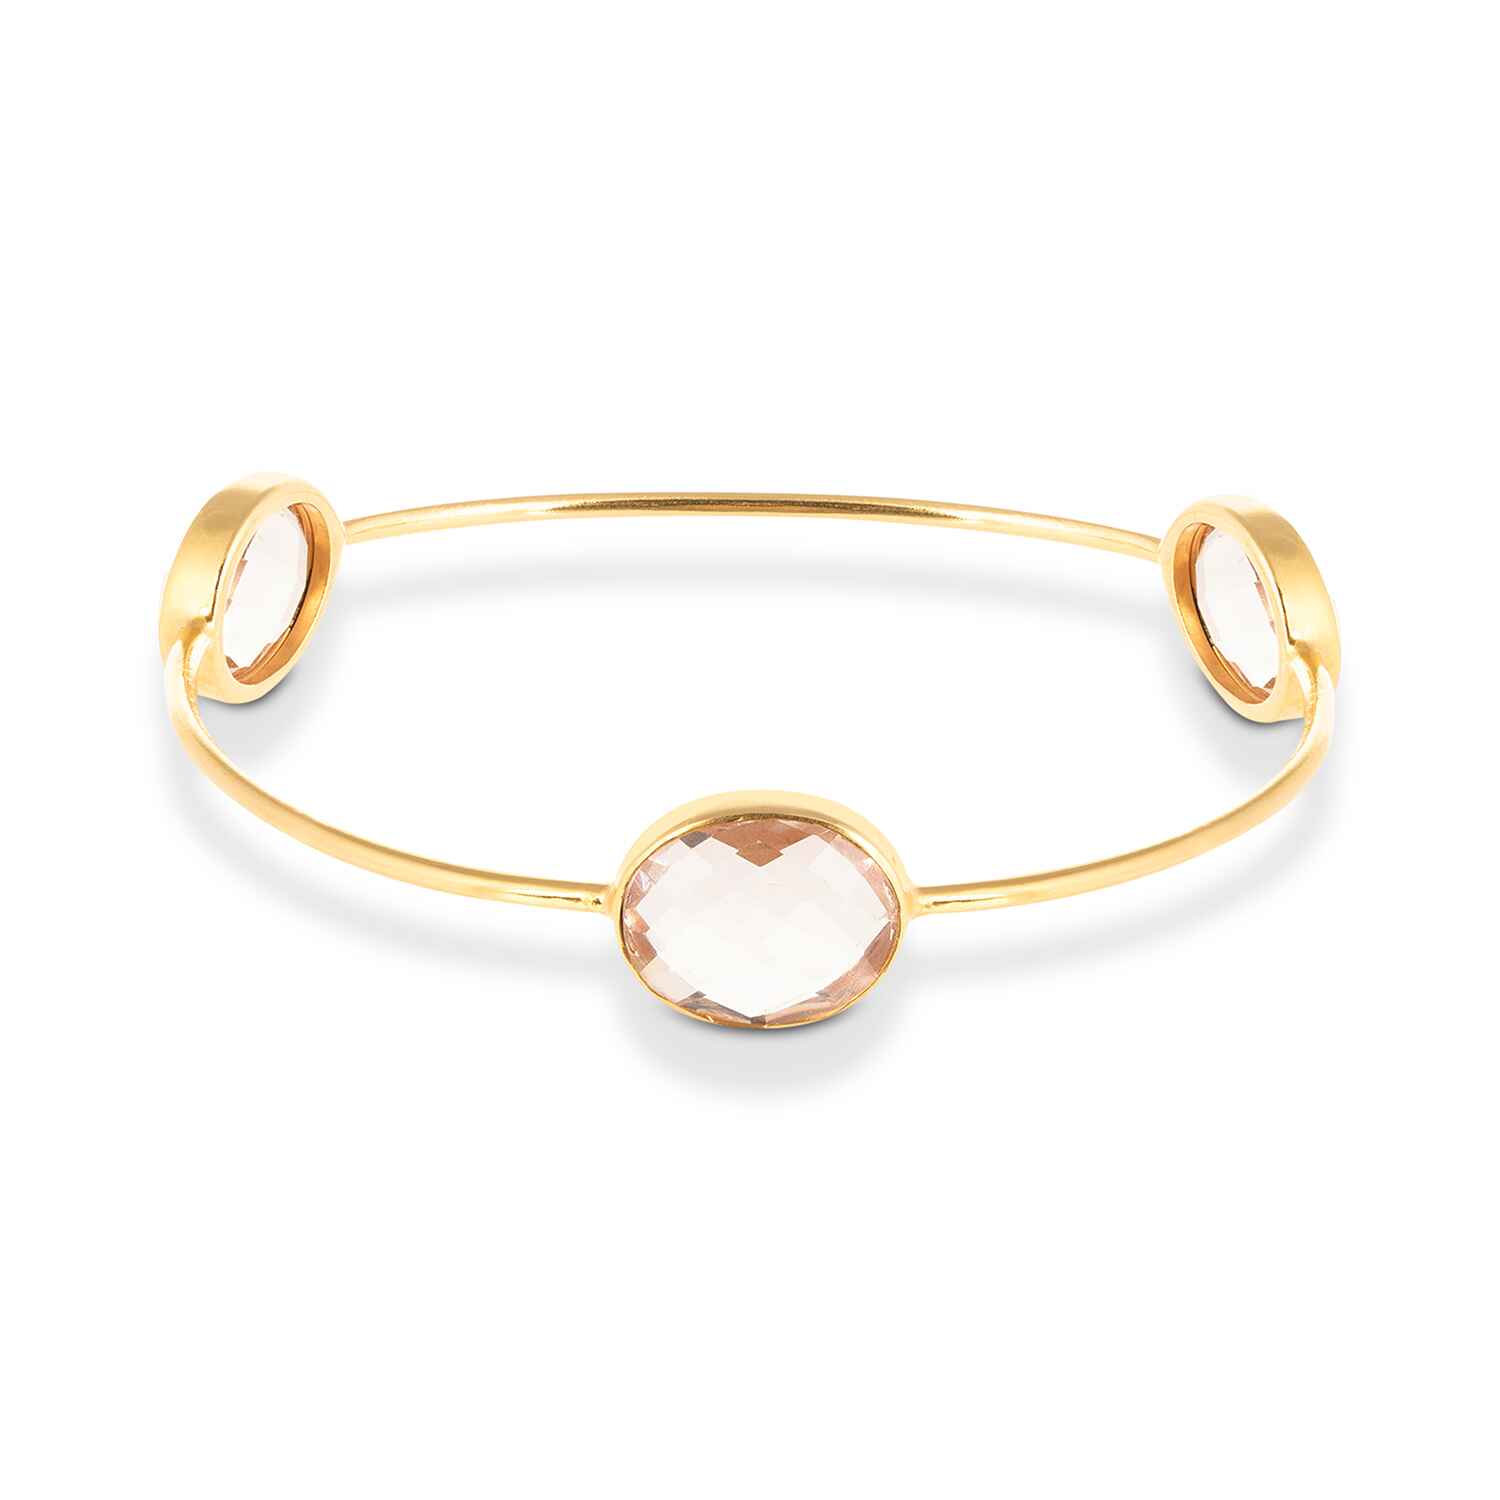 Our Sasha Gold Bangle With Pink Quartz Gemstones is handmade with recycled materials for minimal environmental impact. Adorned with three stunning vintage pink quartz gemstones, this bangle catches the light with your every move.